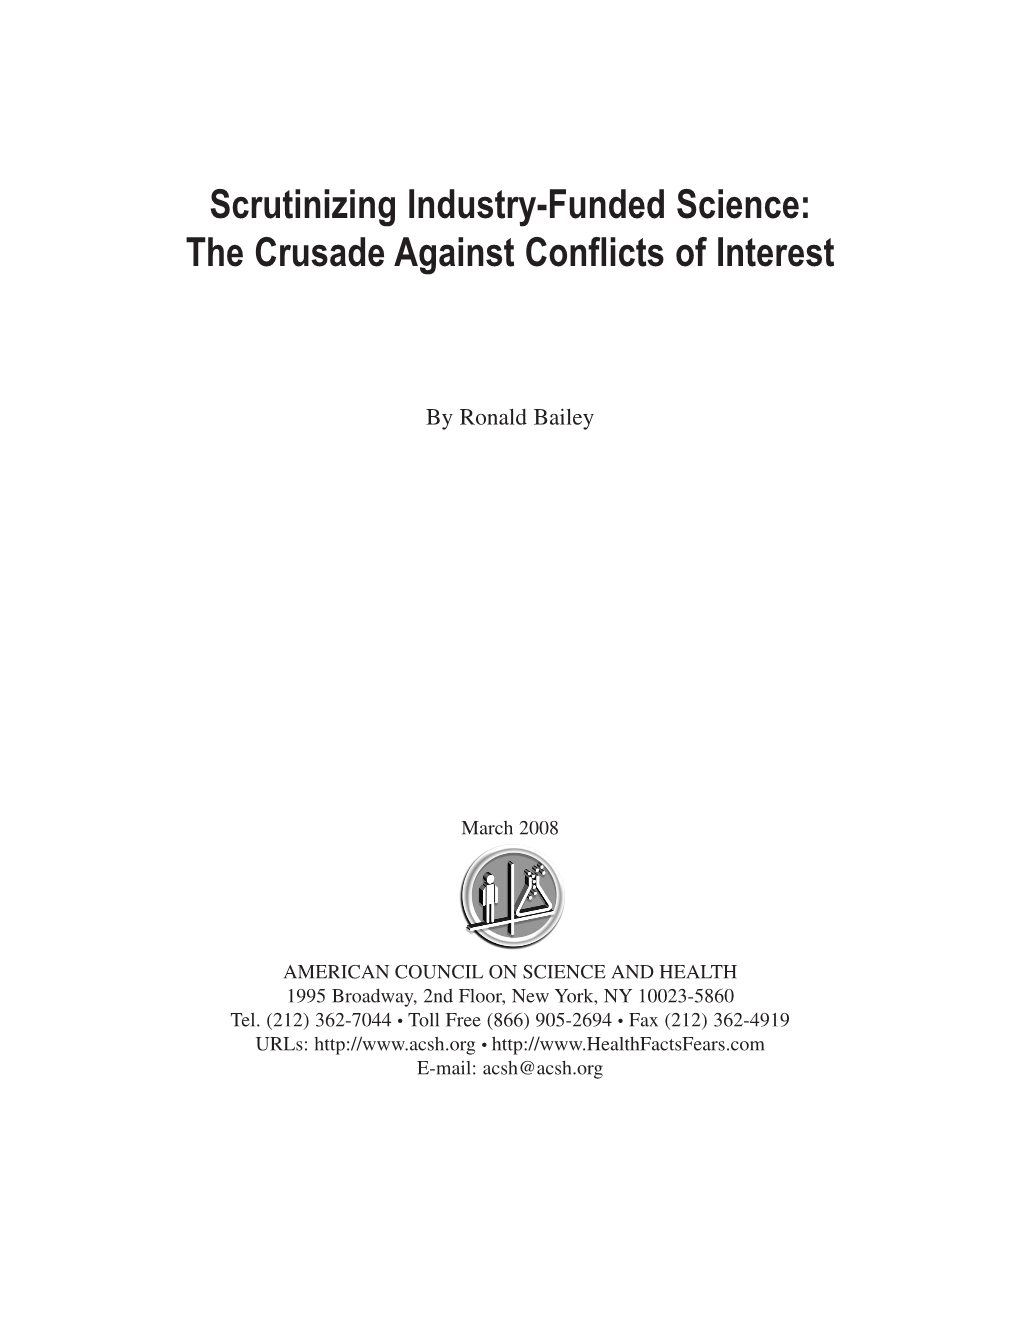 Scrutinizing Industry-Funded Science: the Crusade Against Conflicts of Interest